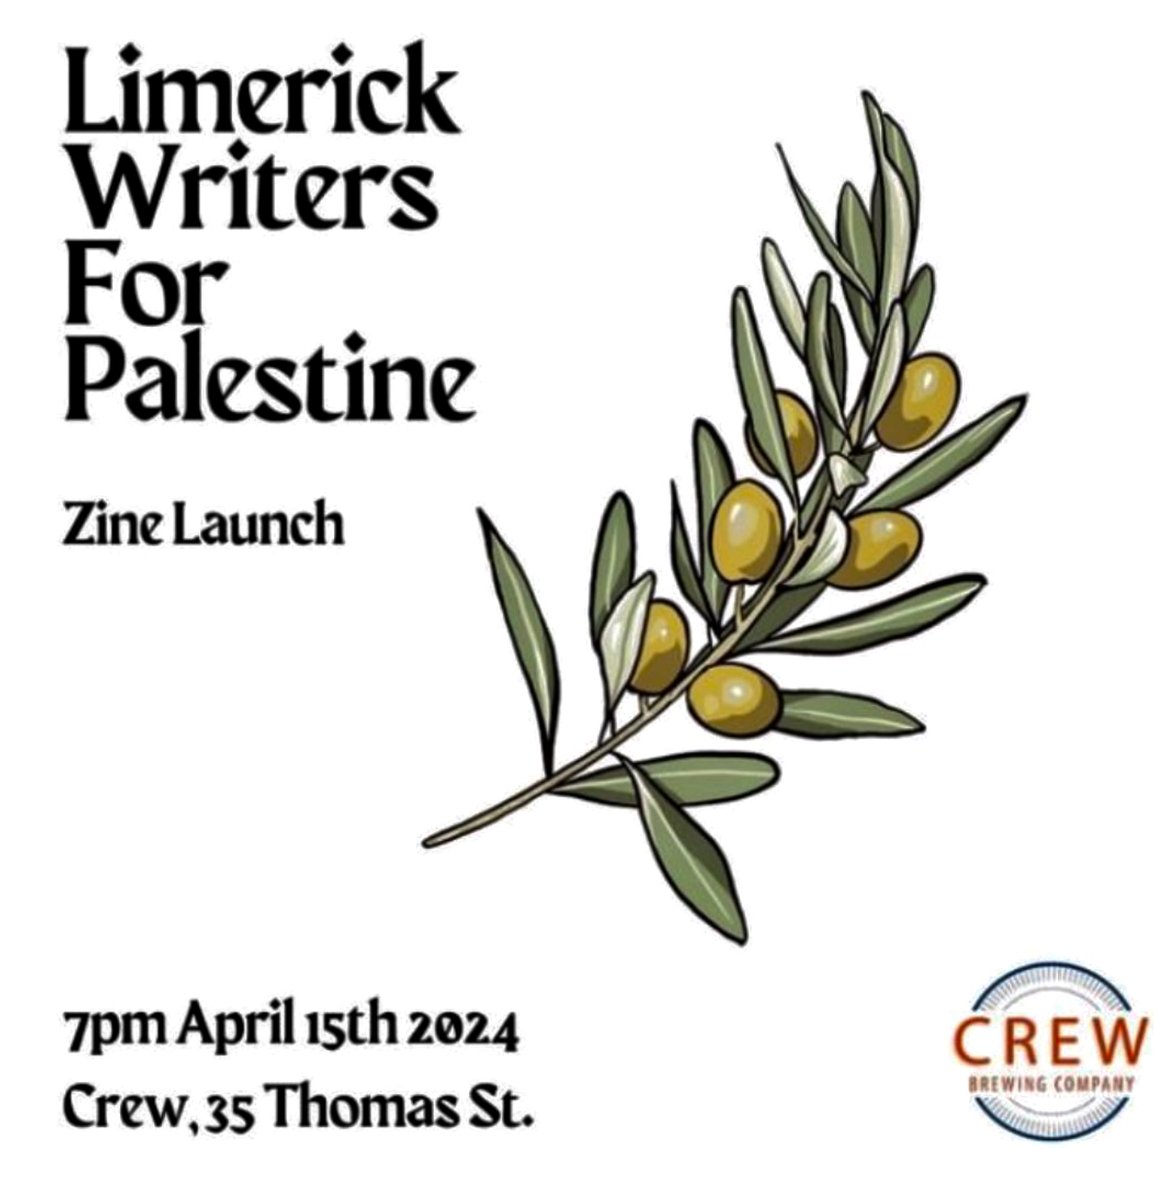 The Irish University sector's silence about the Genocide in Gaza is unforgivable. I will be reading a new poem 'Murder In The University' at the launch of the LIMERICK WRITERS FOR PALESTINE e-zine on APRIL 15TH. Come along to support this publication.